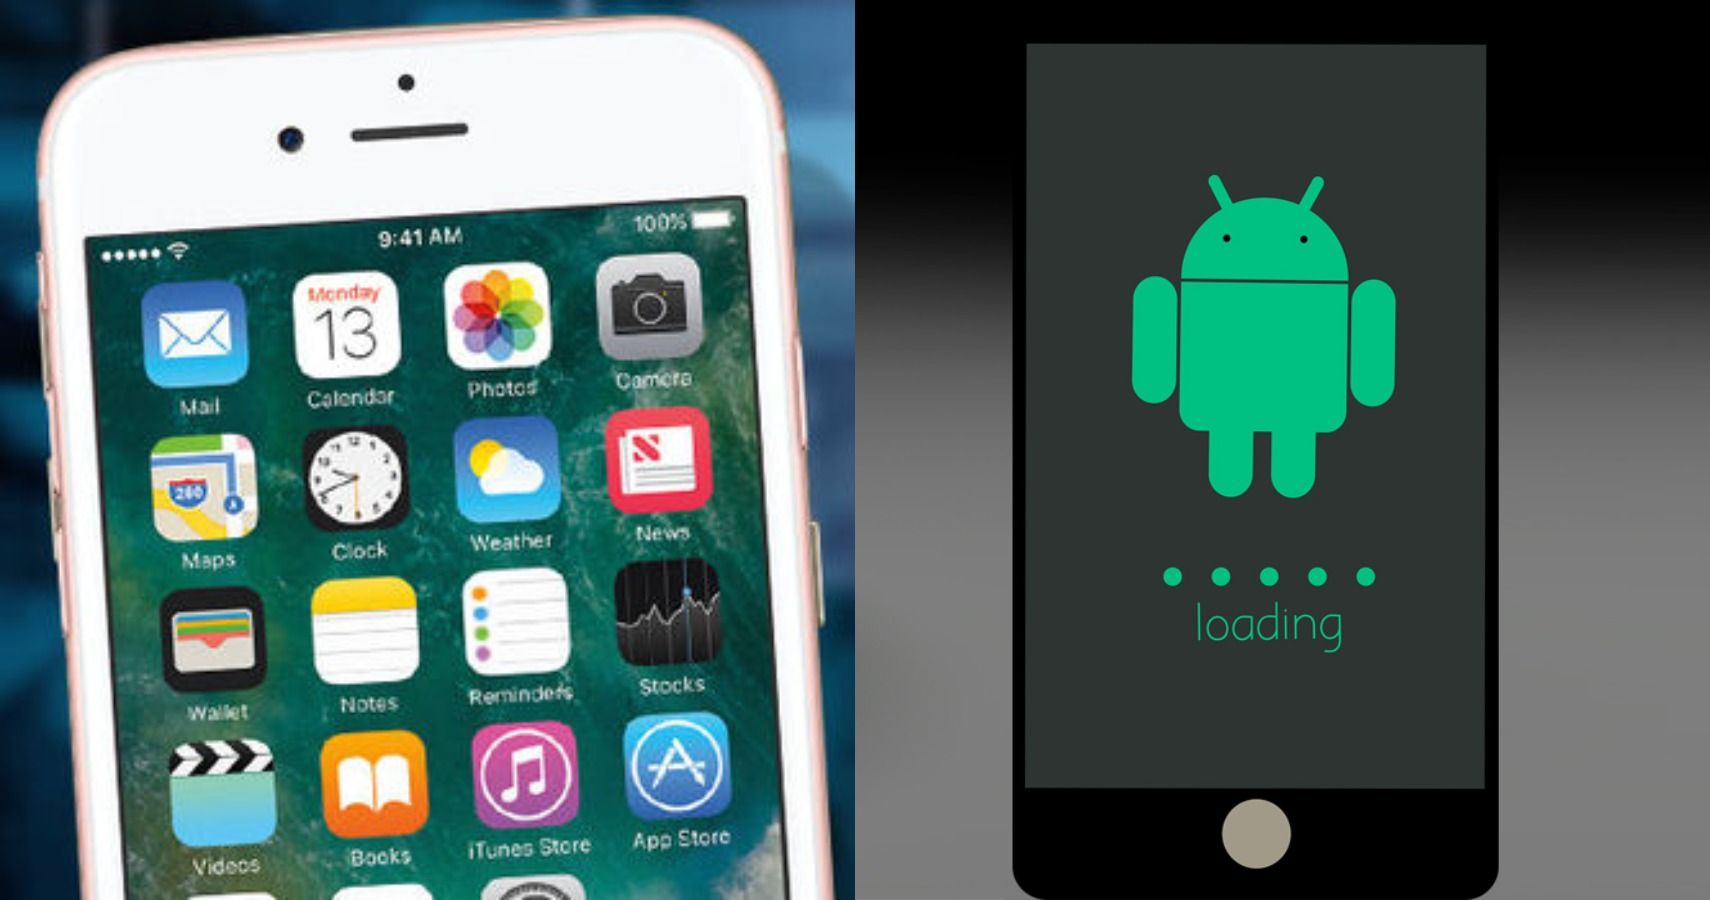 5 Things Android Phones Can Do That iPhones Can’t (& 5 Things Only iPhones Can Do)